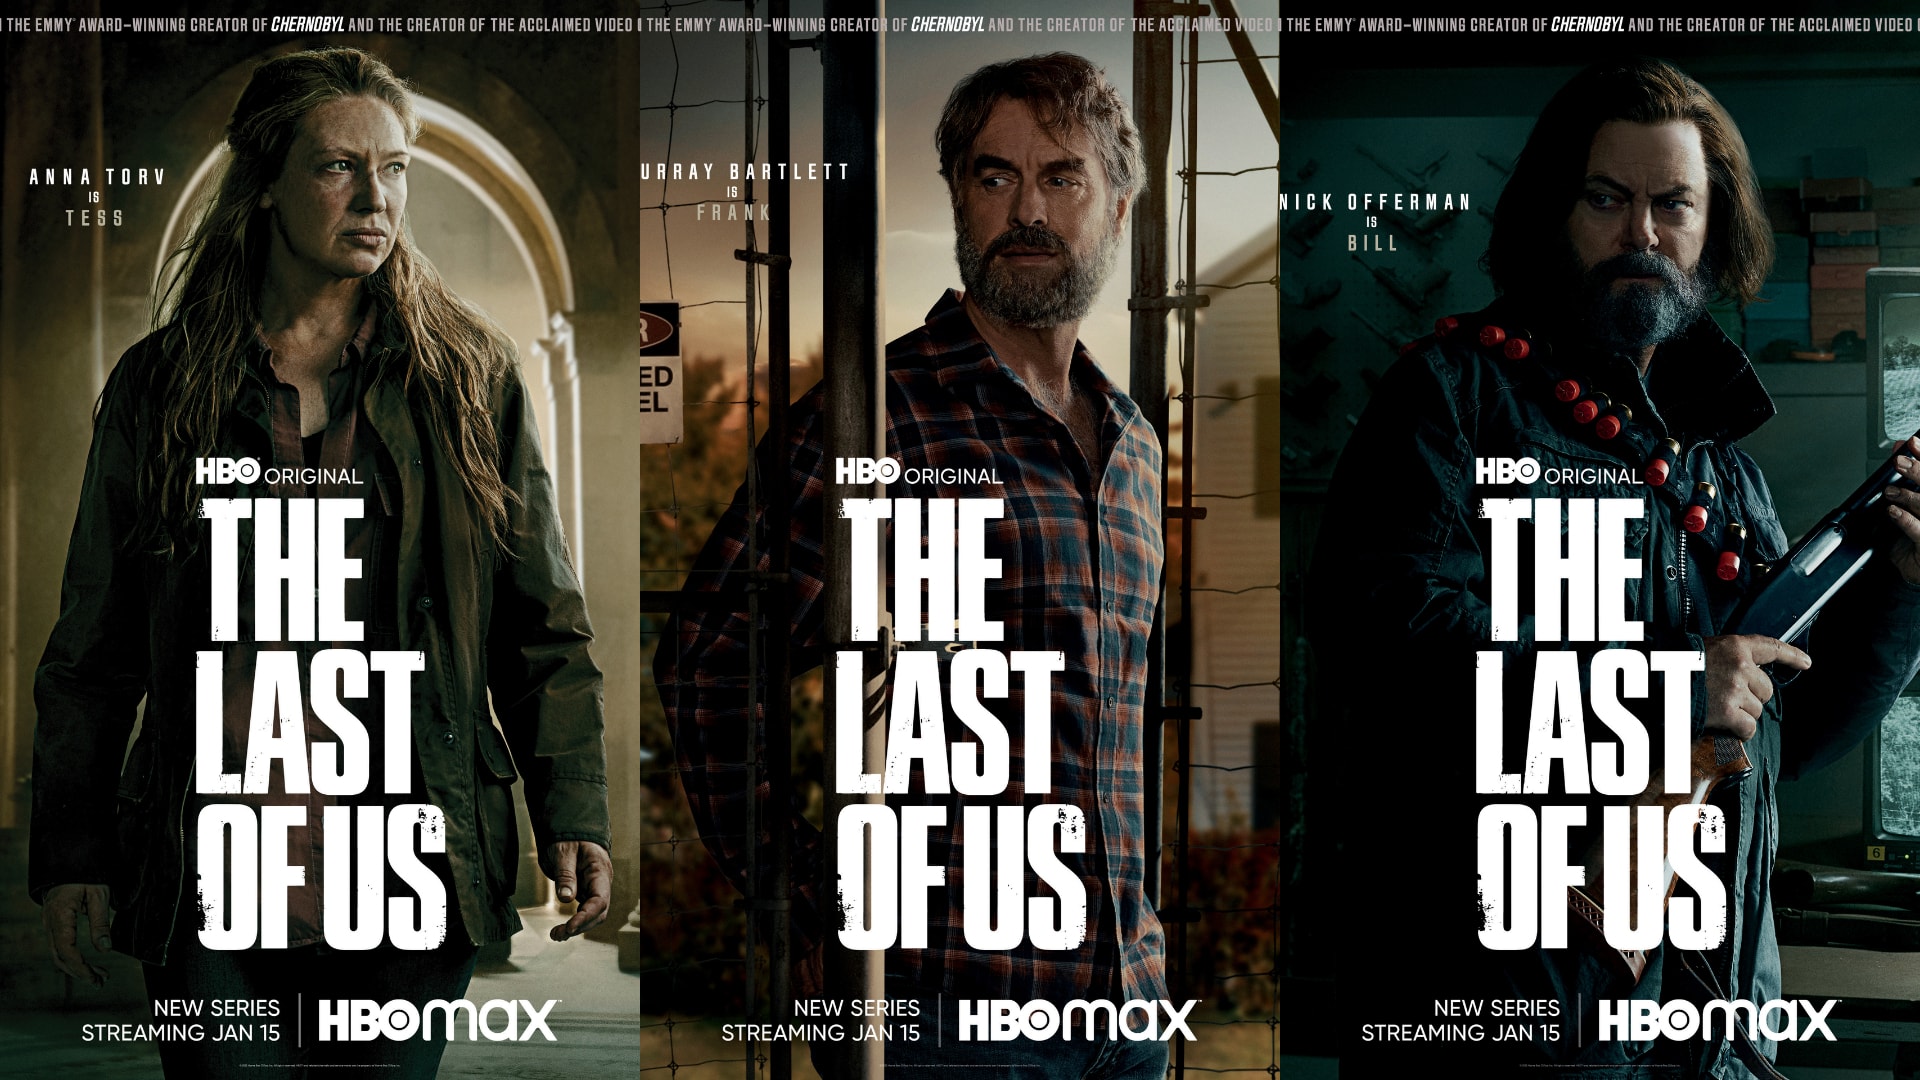 The Last of Us HBO Posters Show Off the Full Cast, Including Tommy